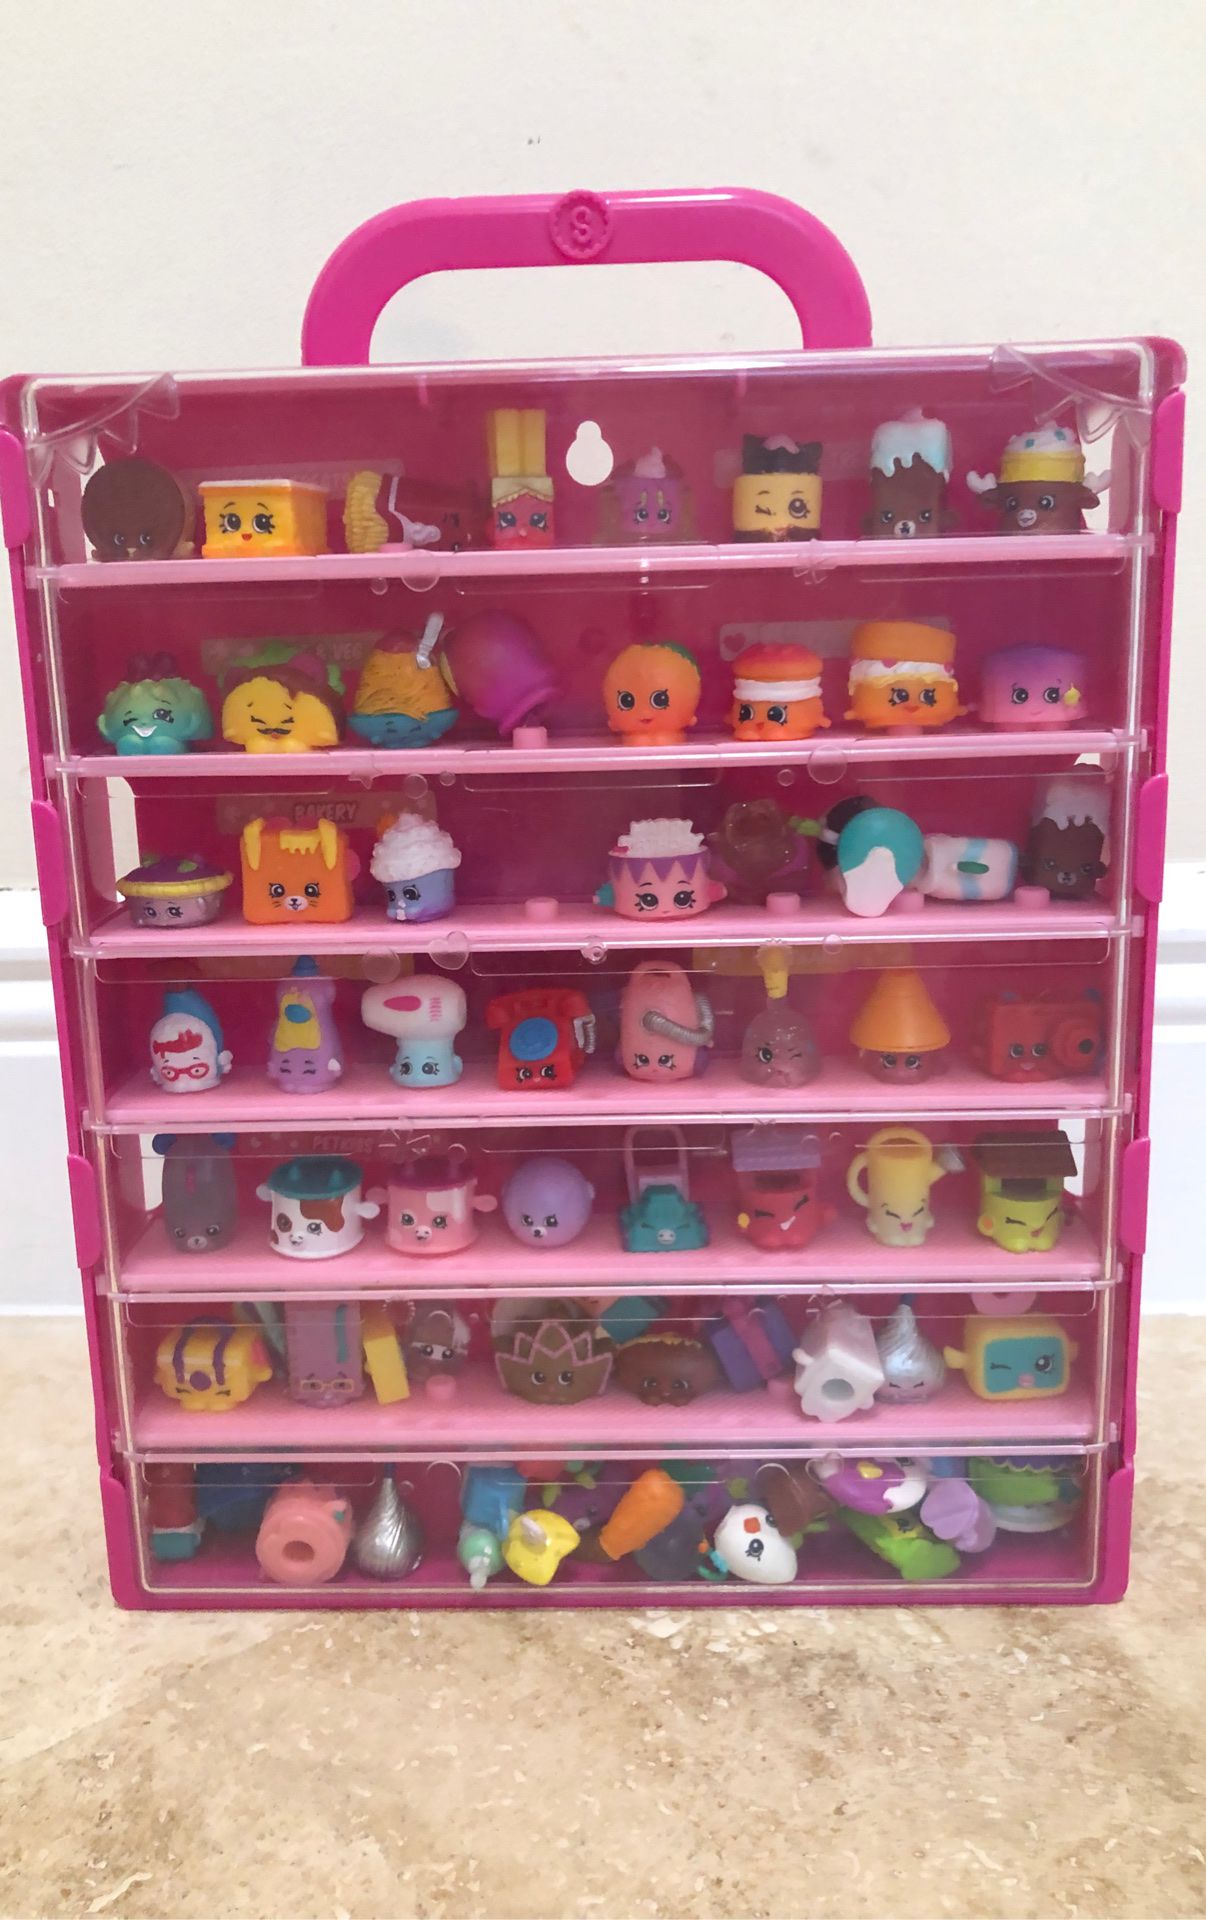 Shopkins set (Carrying Case not included)